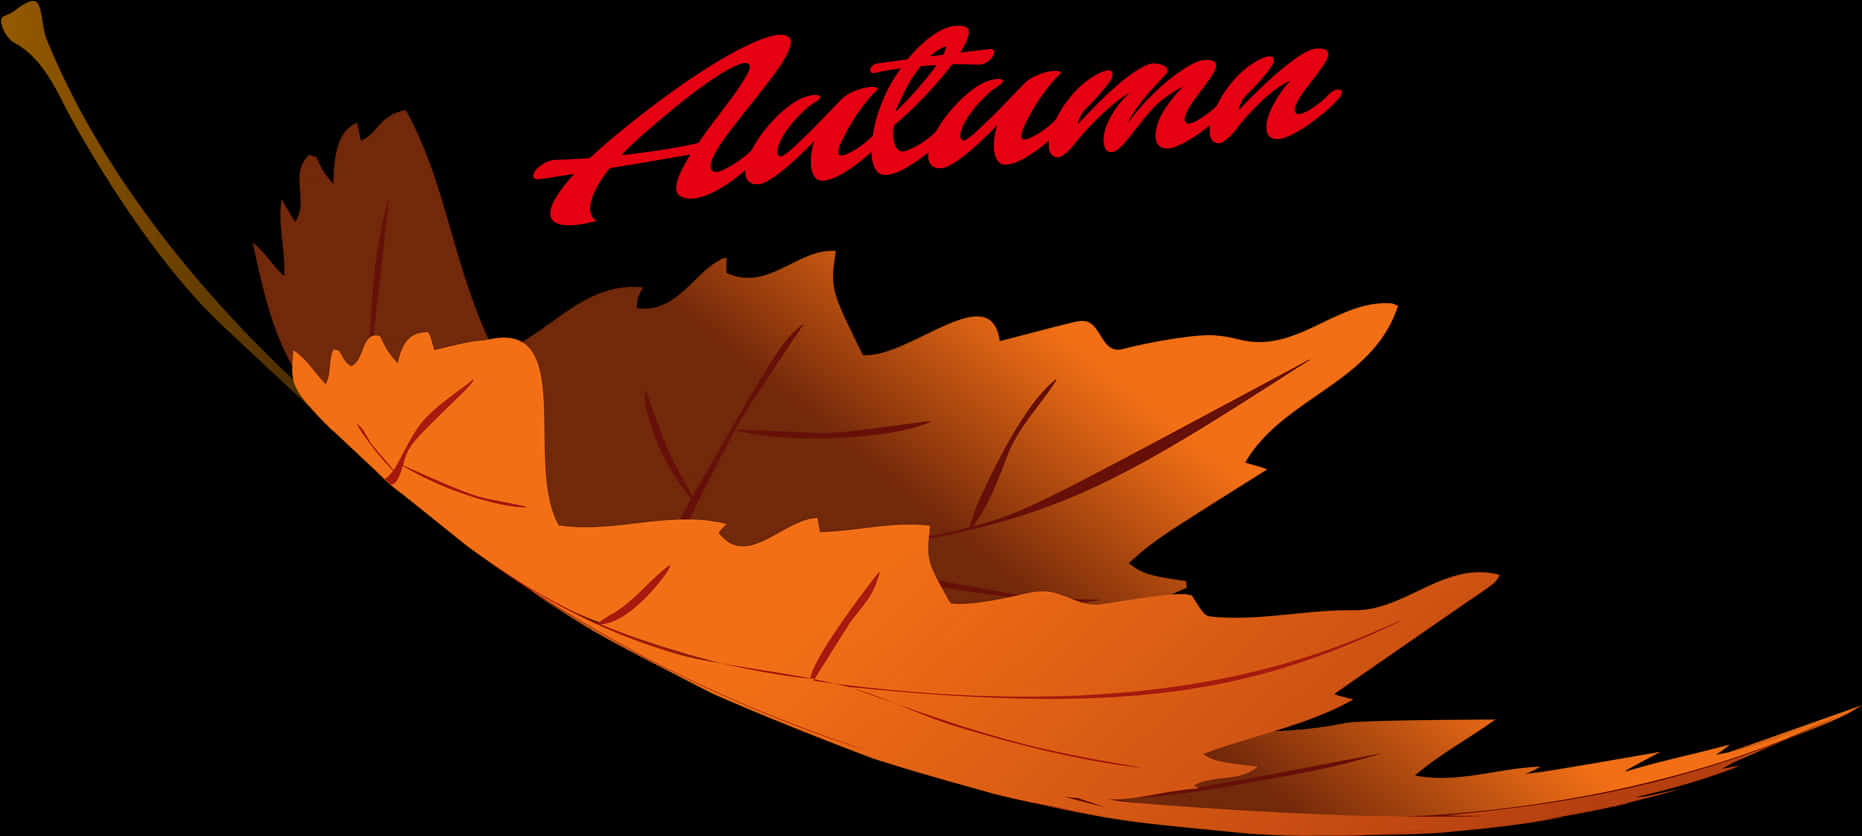 Autumn Leaf Graphic PNG image